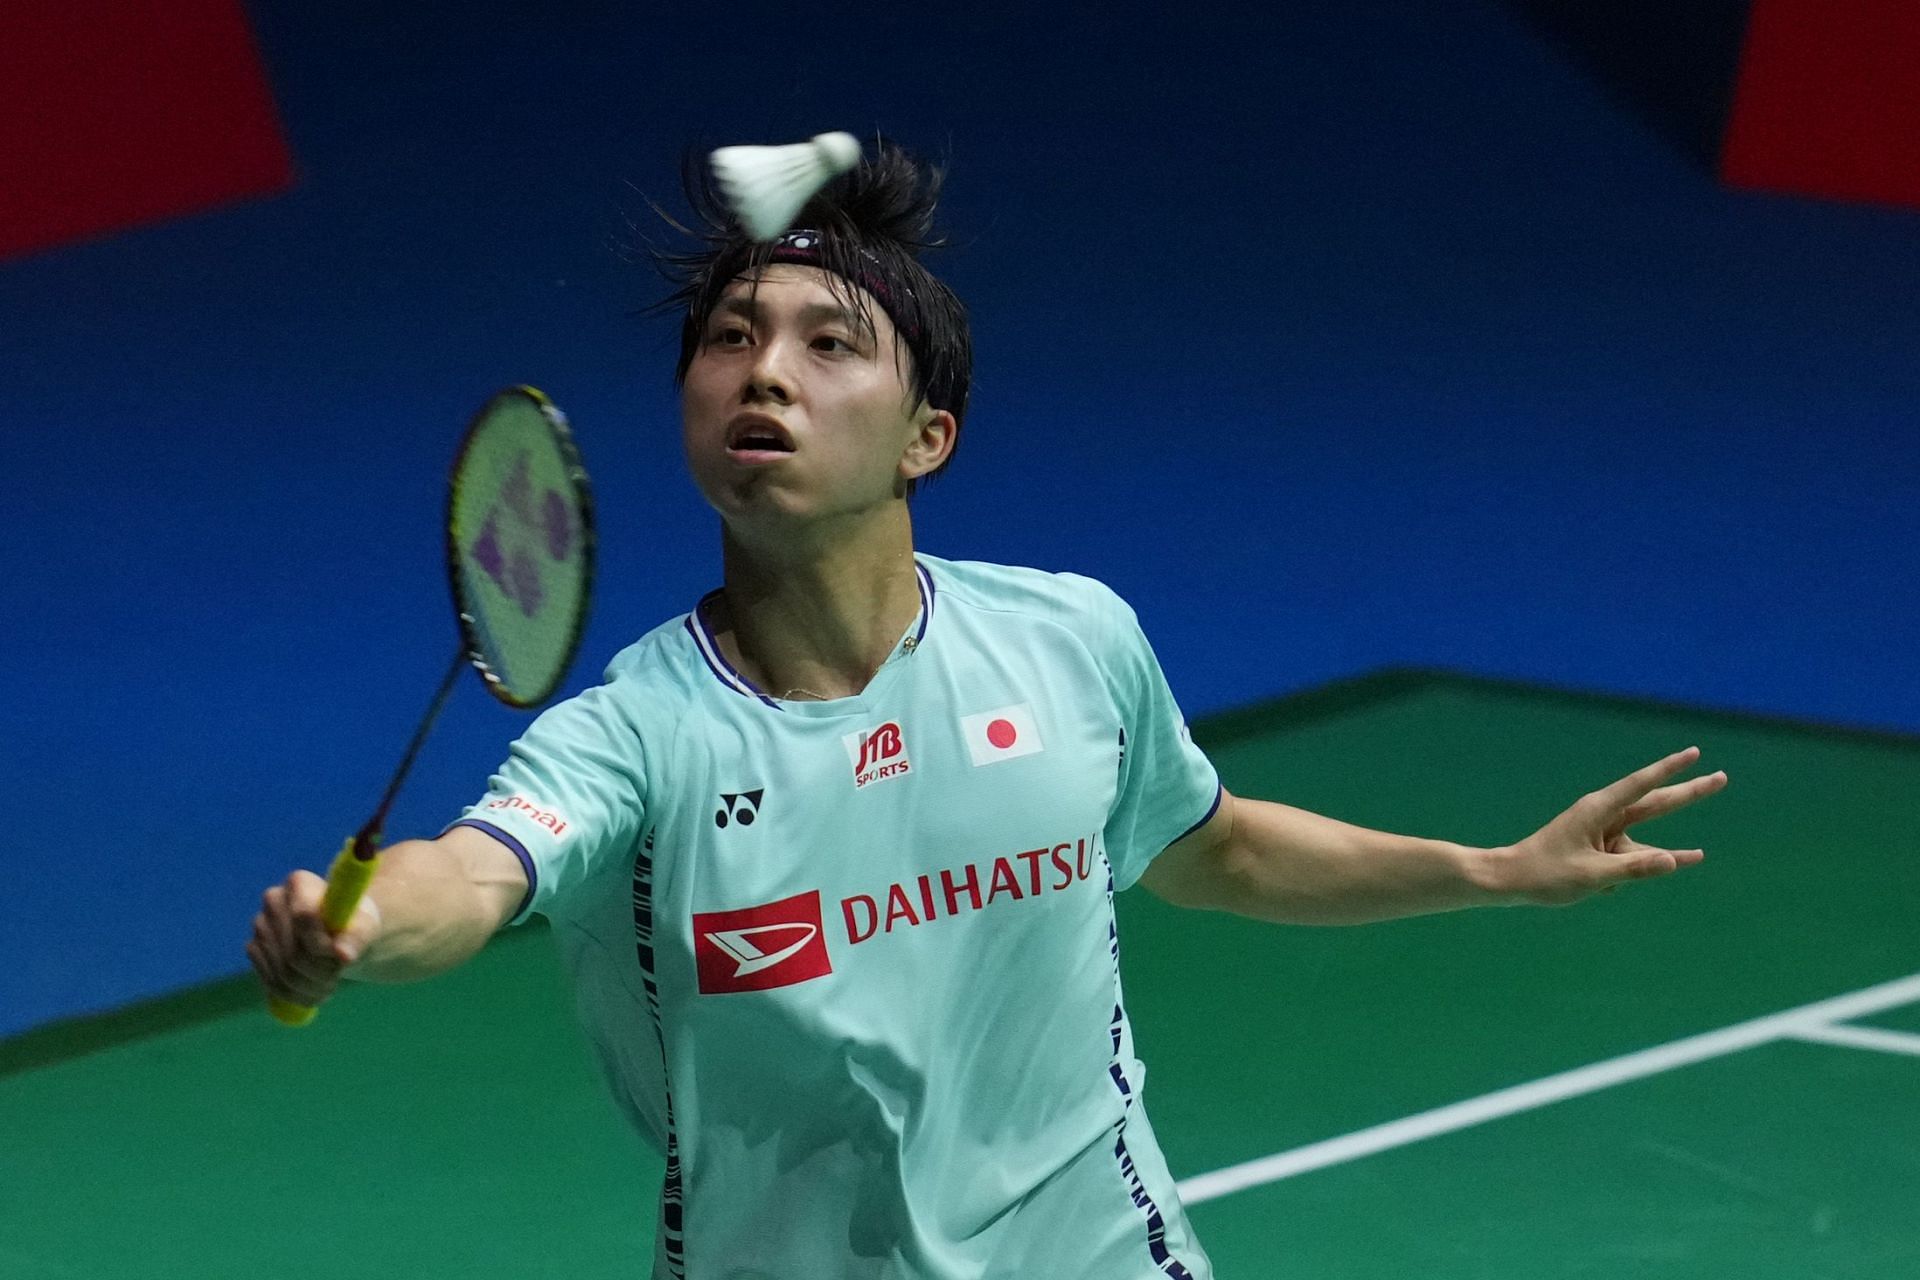 Indonesia Masters 2023 Lakshya Sen vs Kodai Naraoka preview, head-to-head, prediction, where to watch and live streaming details